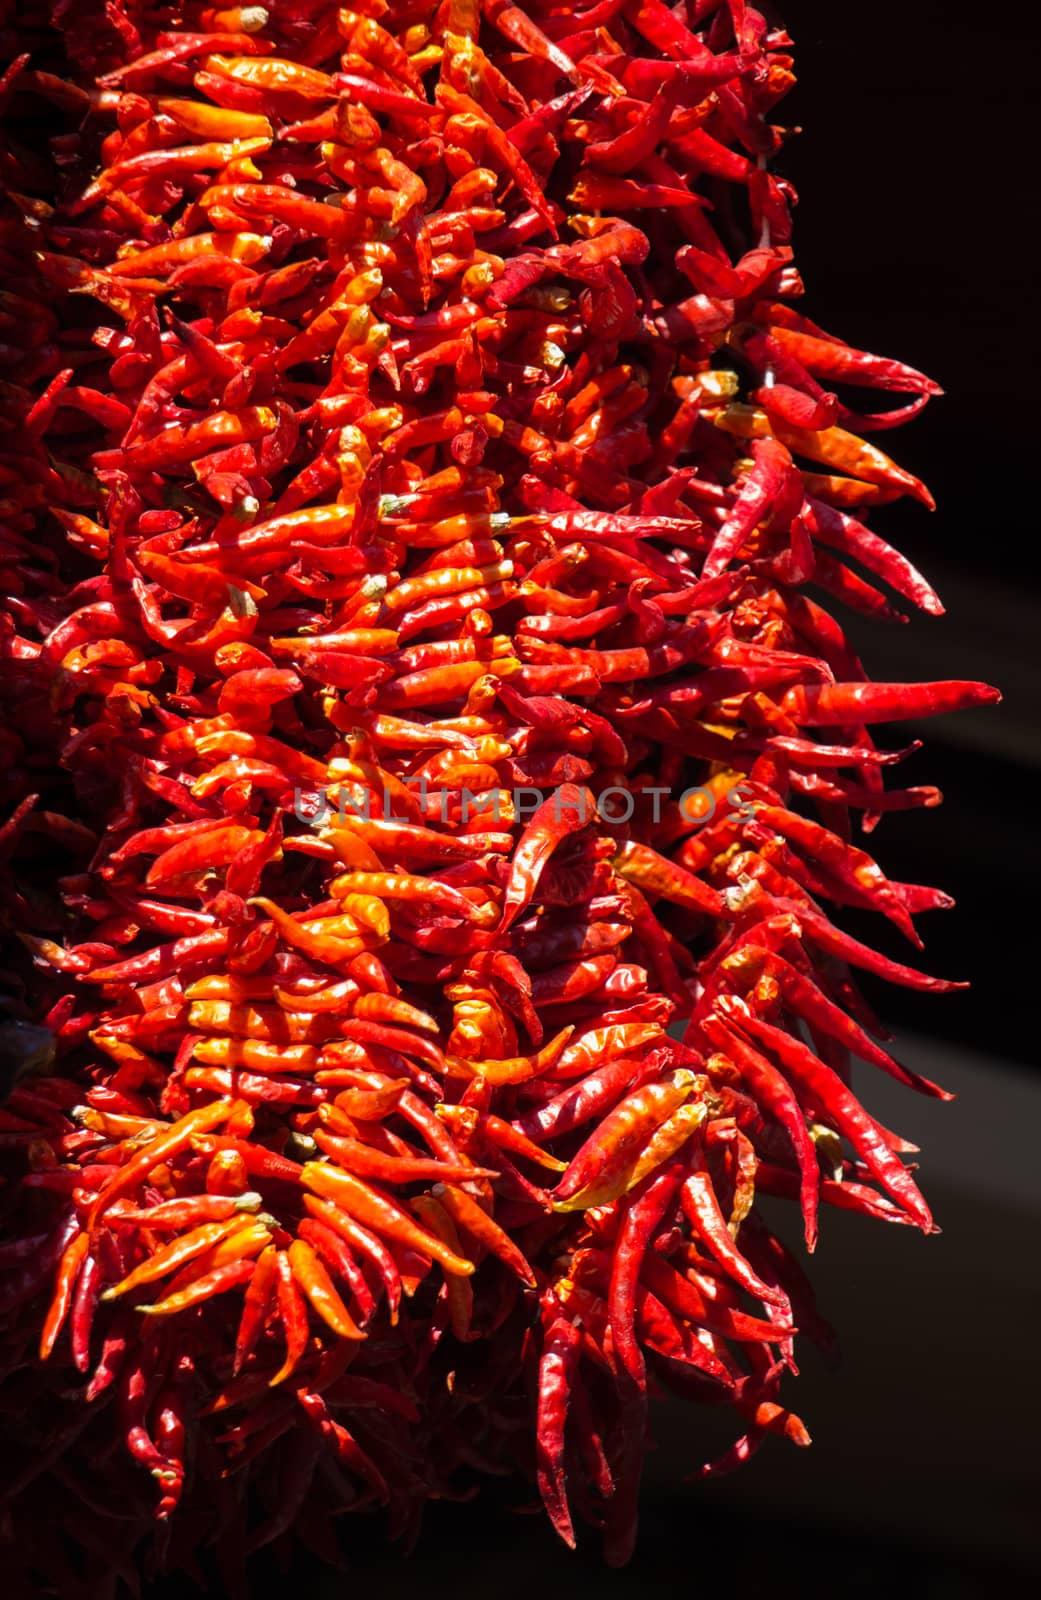 Bundles of red  peppers dry in the sun  by berkay